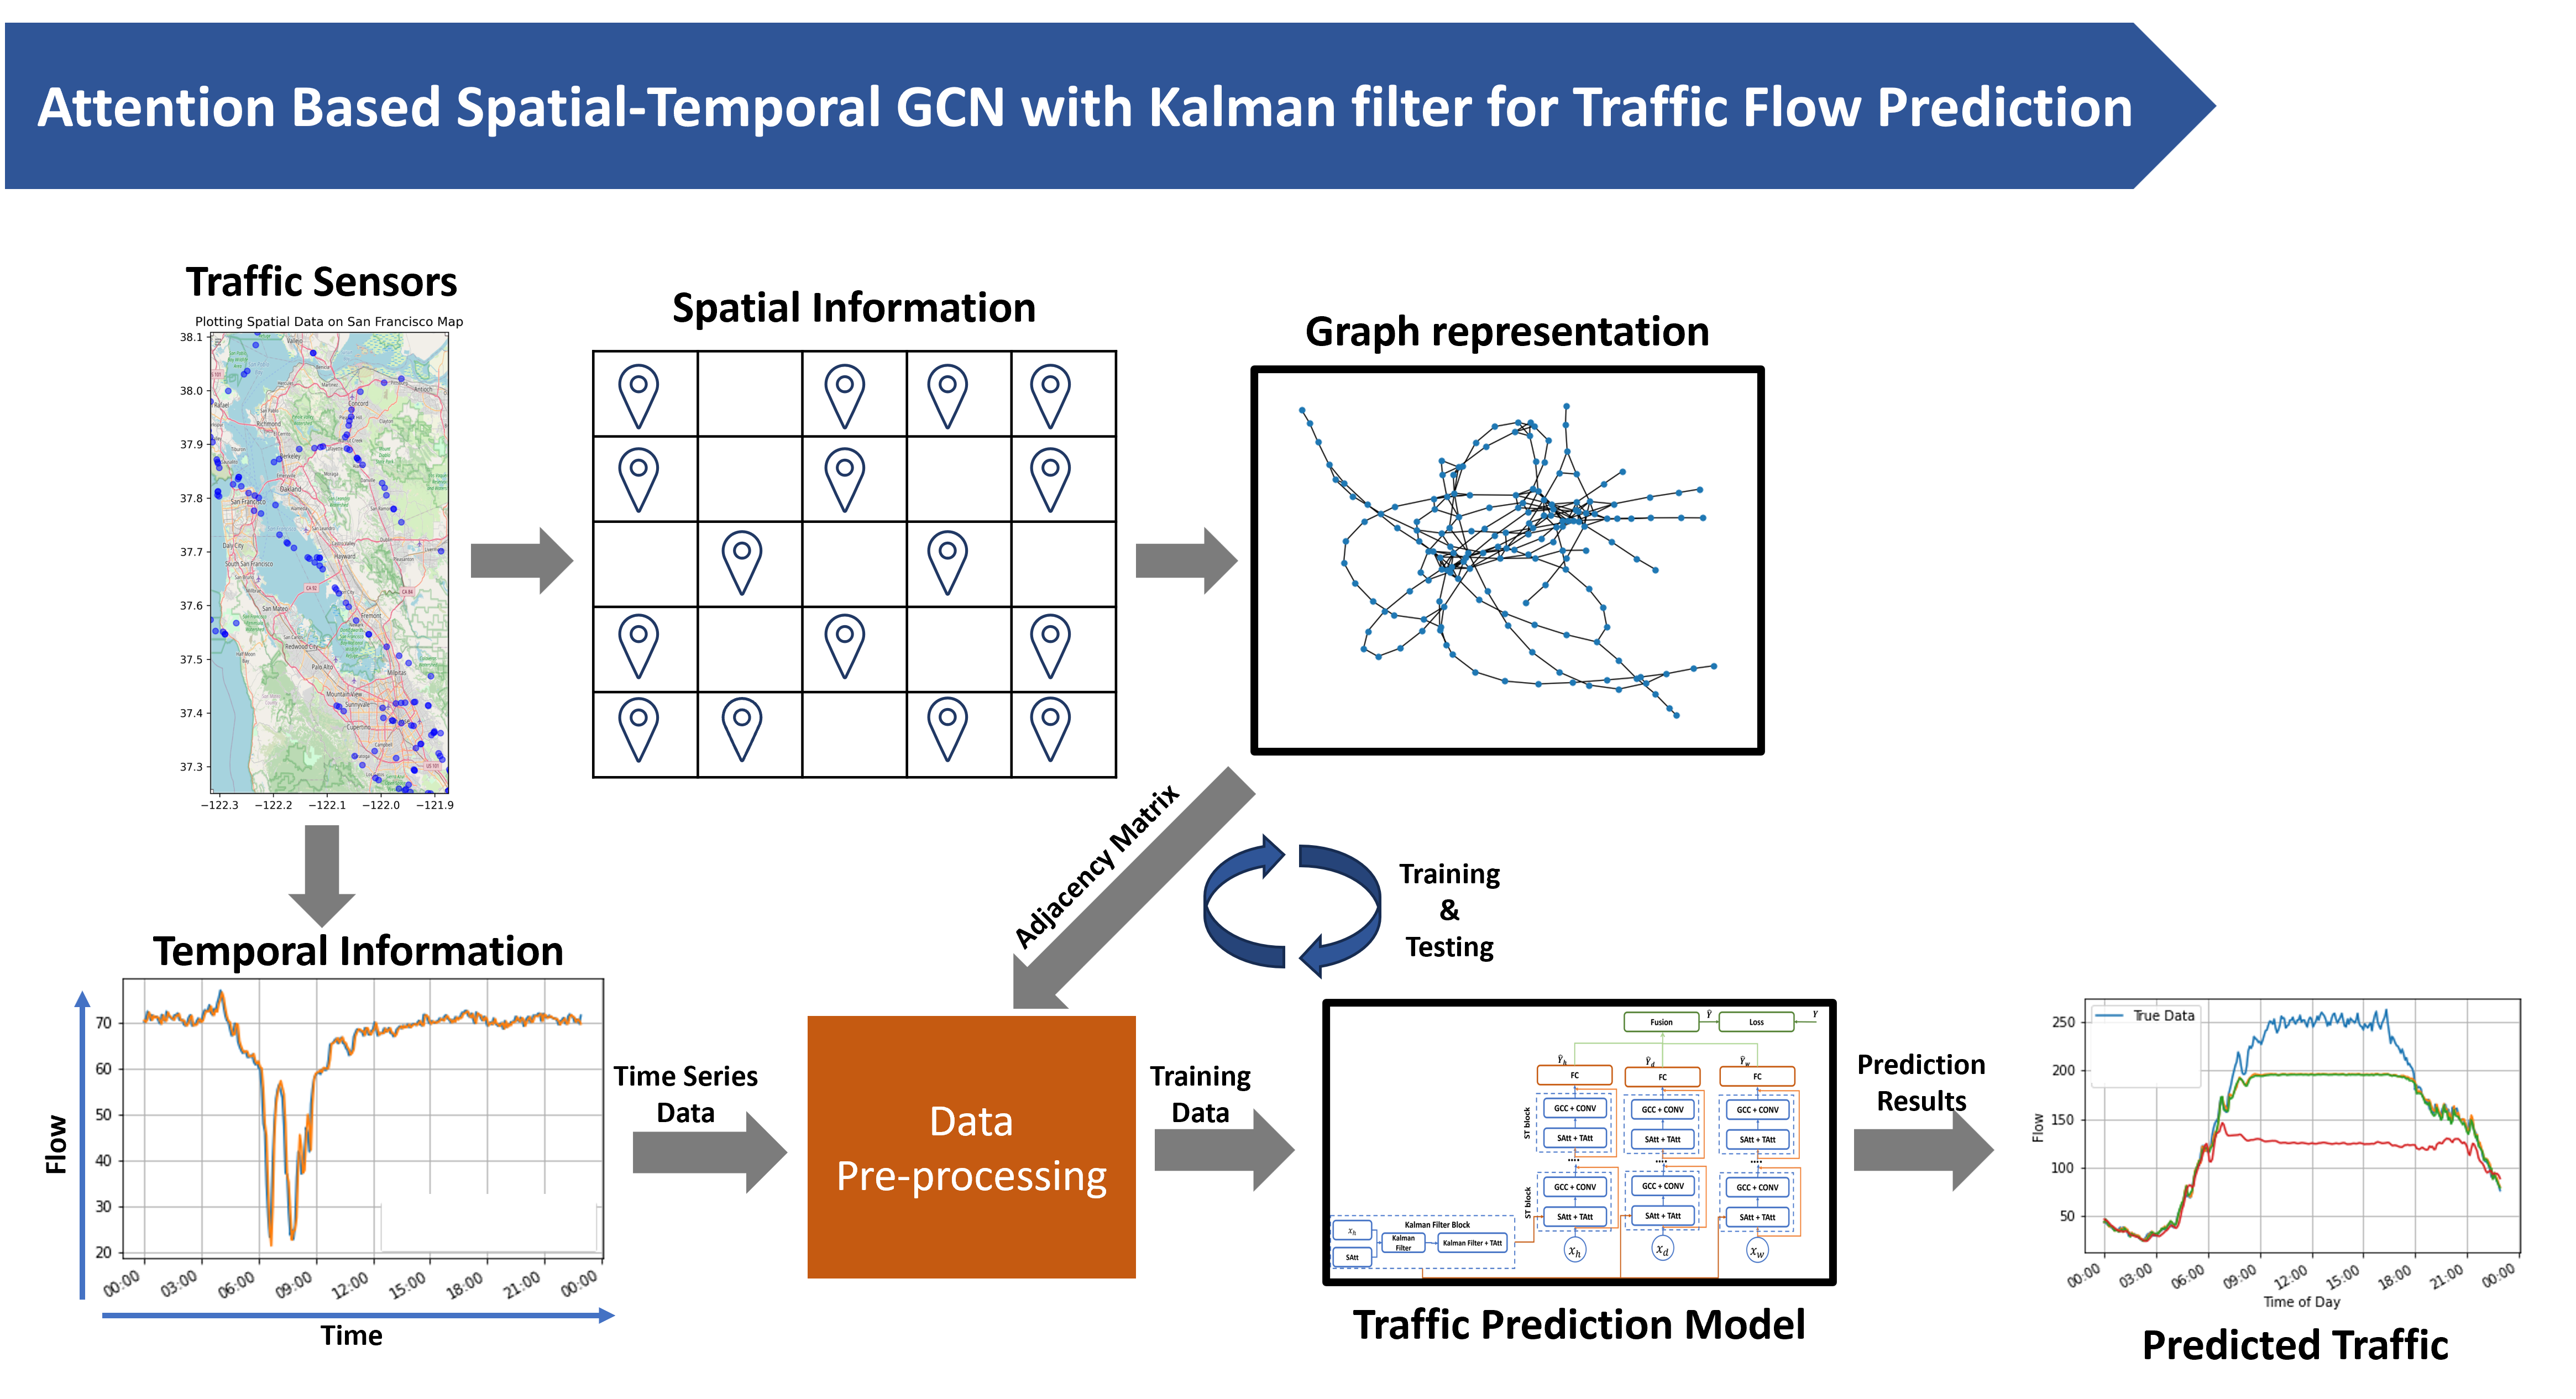 Attention Based Spatial-Temporal GCN with Kalman filter for Traffic Flow Prediction